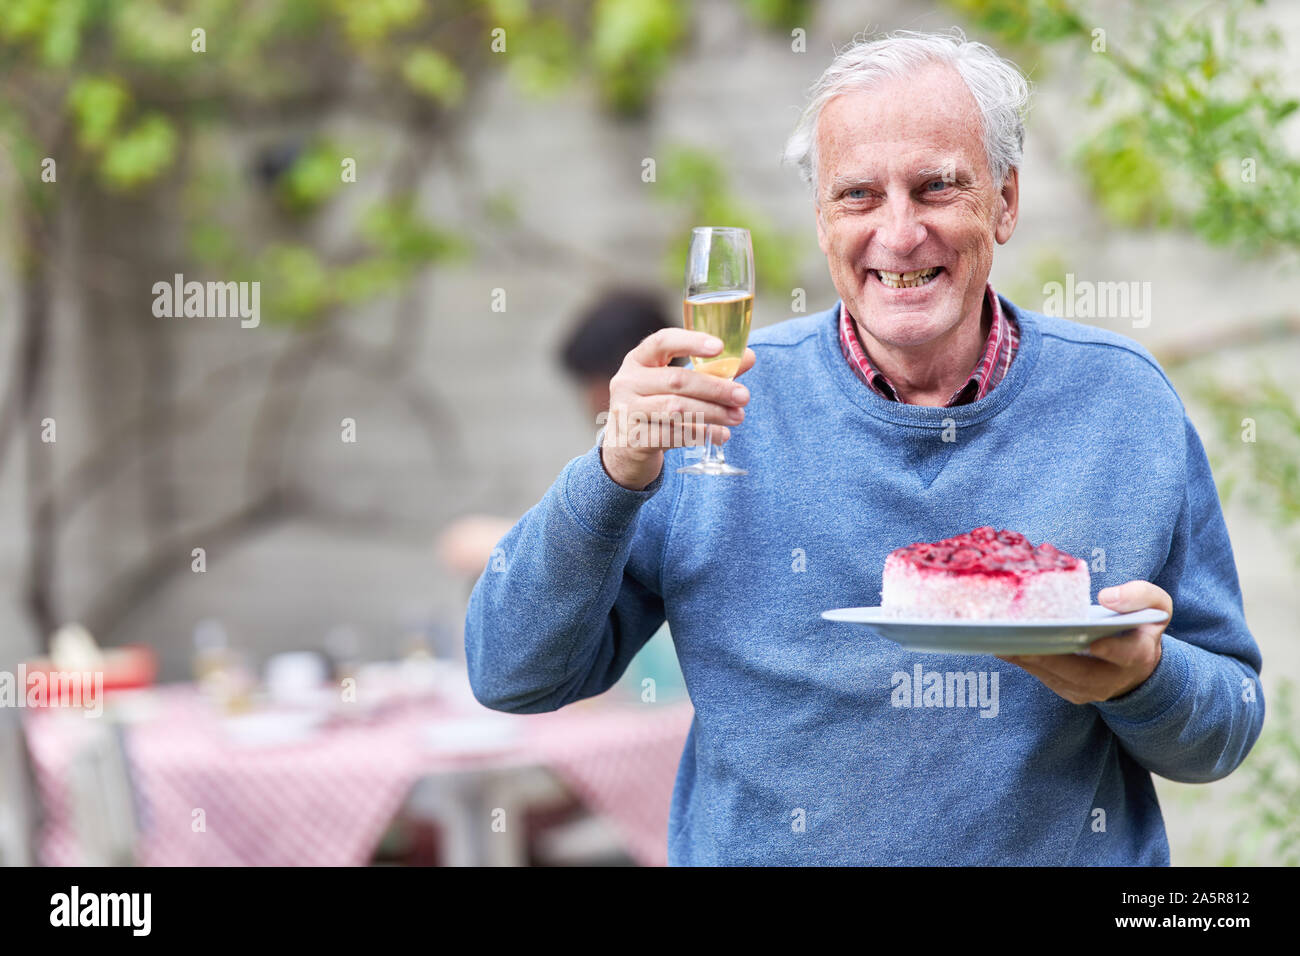 Senior man with champagne glass and a piece of birthday cake at a garden party Stock Photo